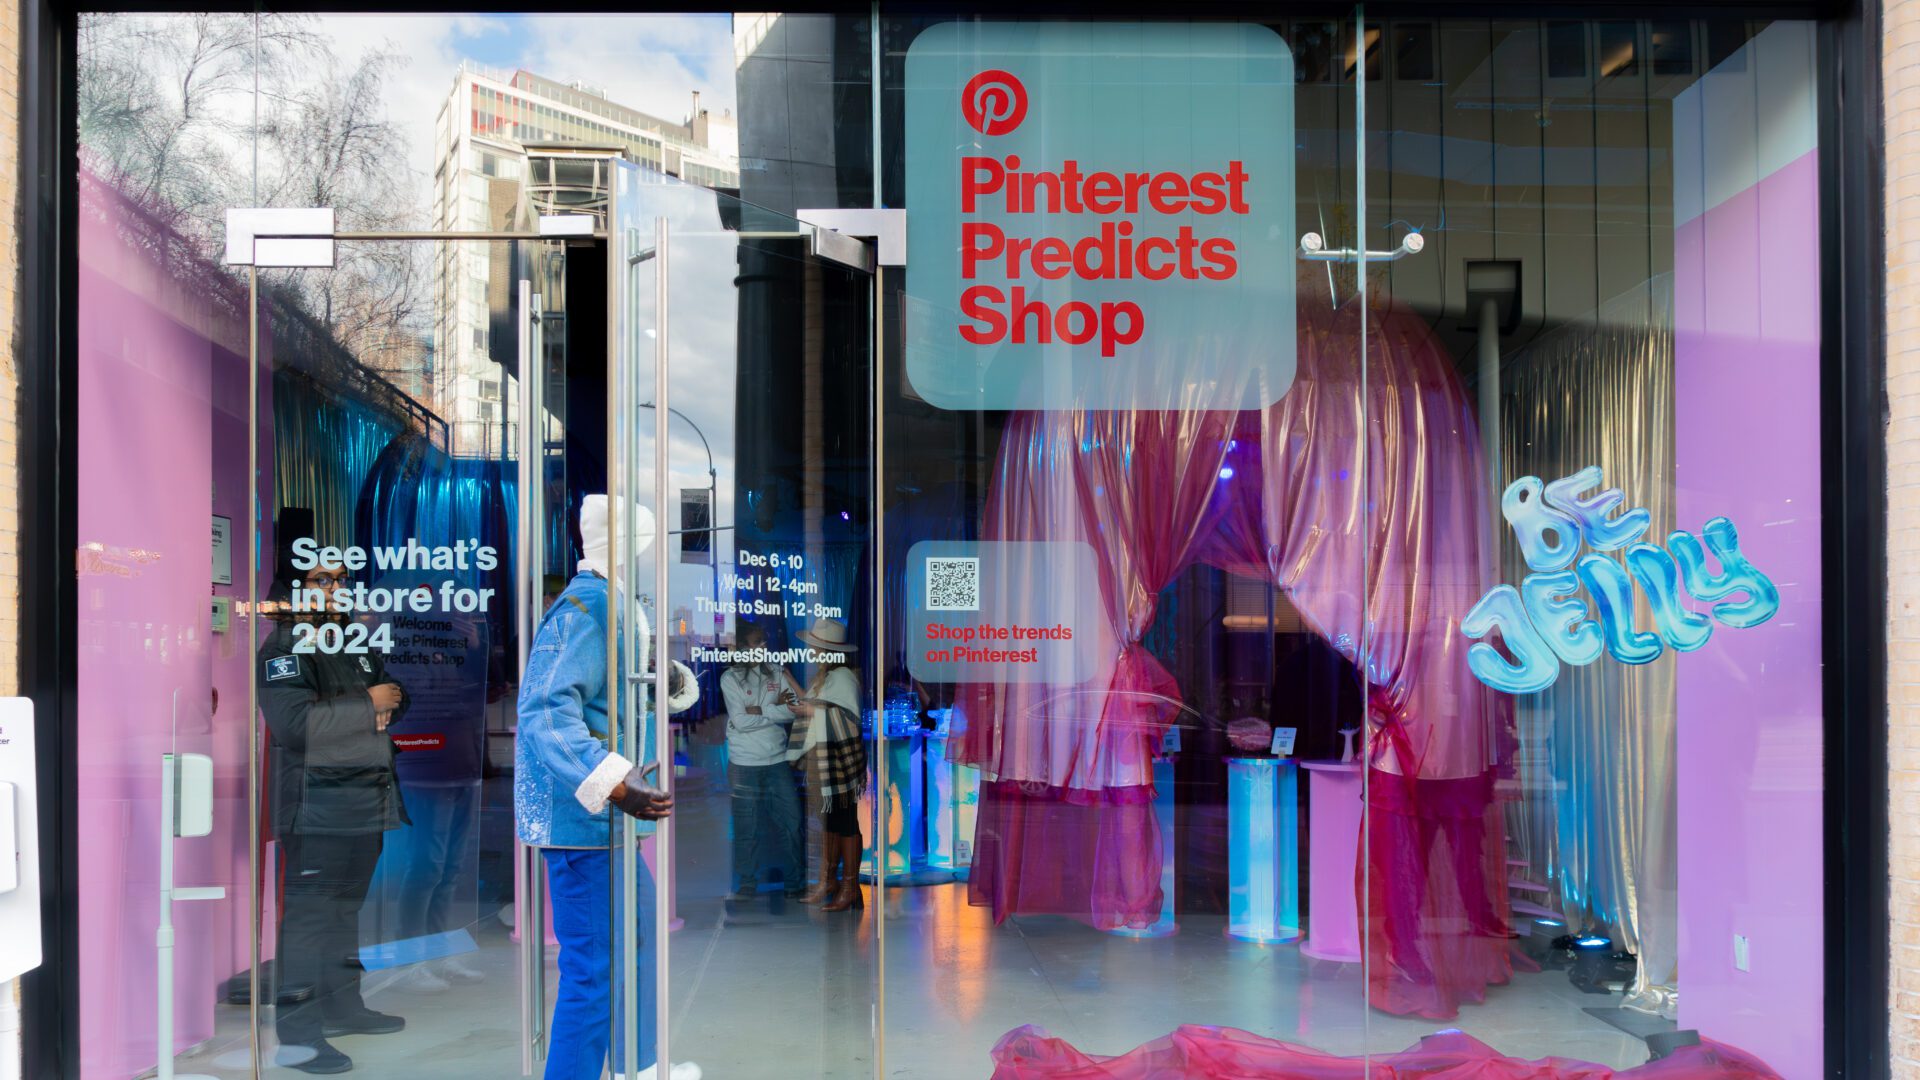 Pinterest Predicts pop-up in NYC's Meatpacking district.